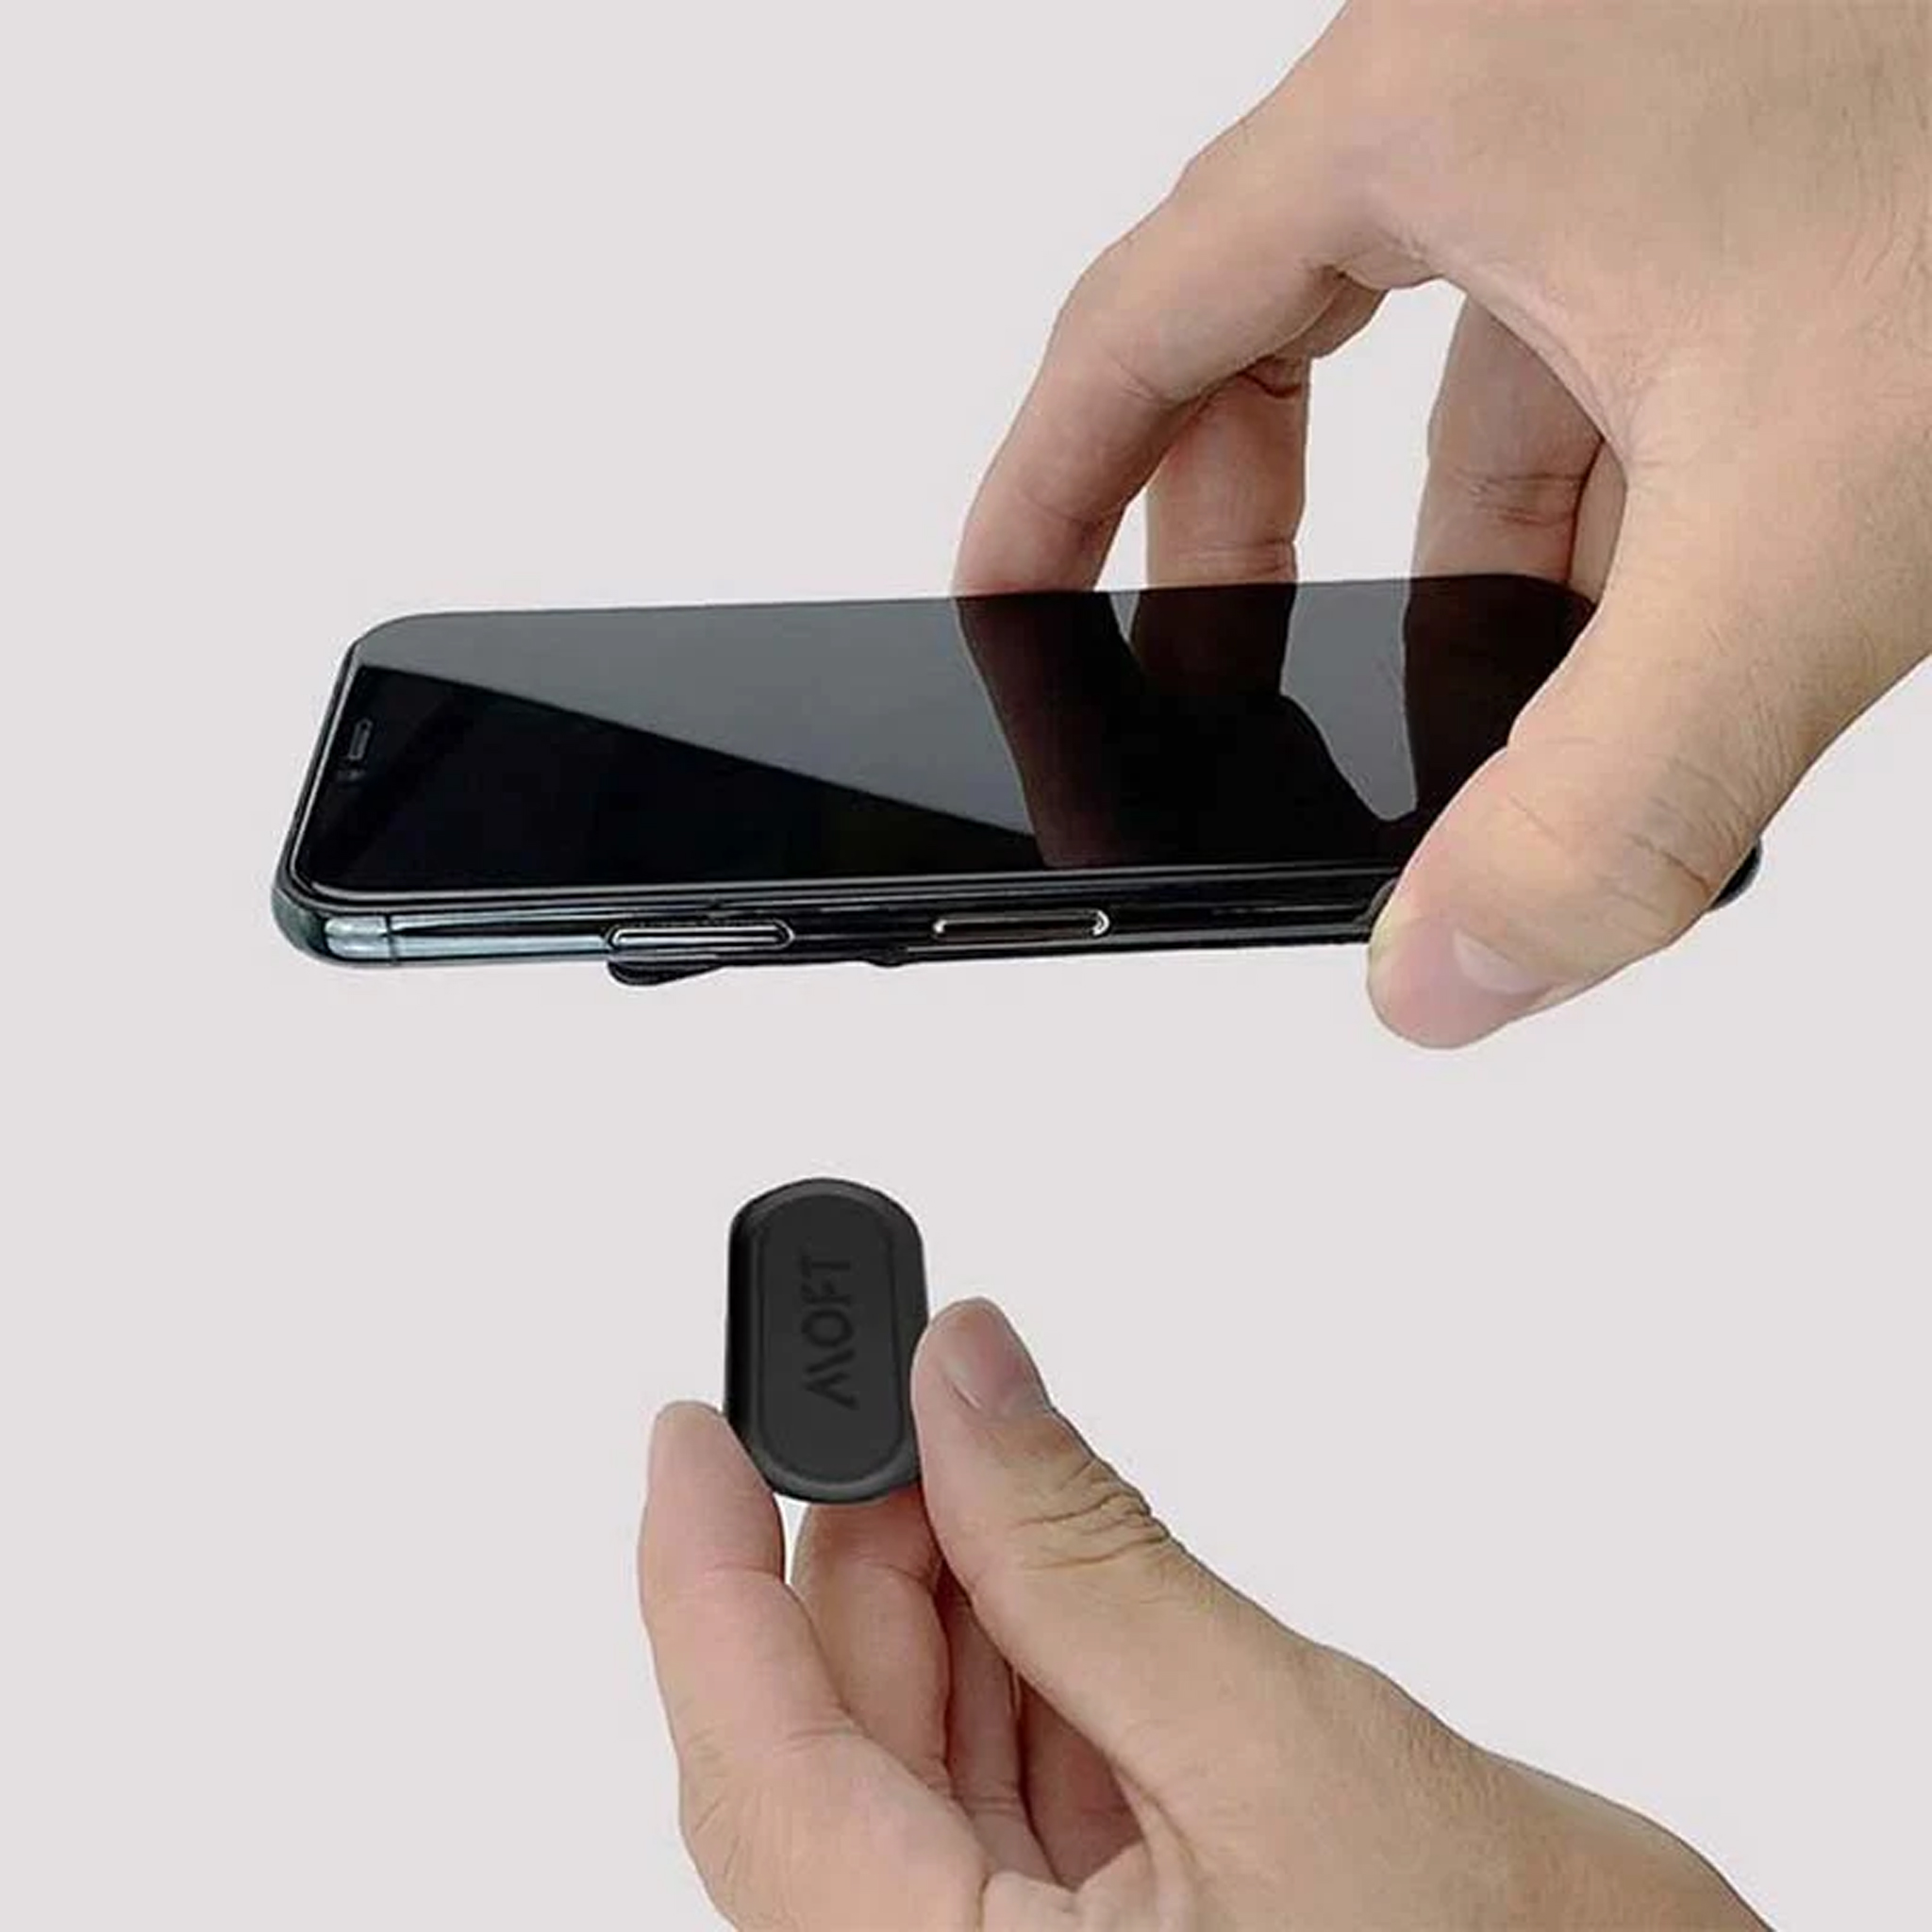 MOFT Magnetic Sticky Pads For Phone